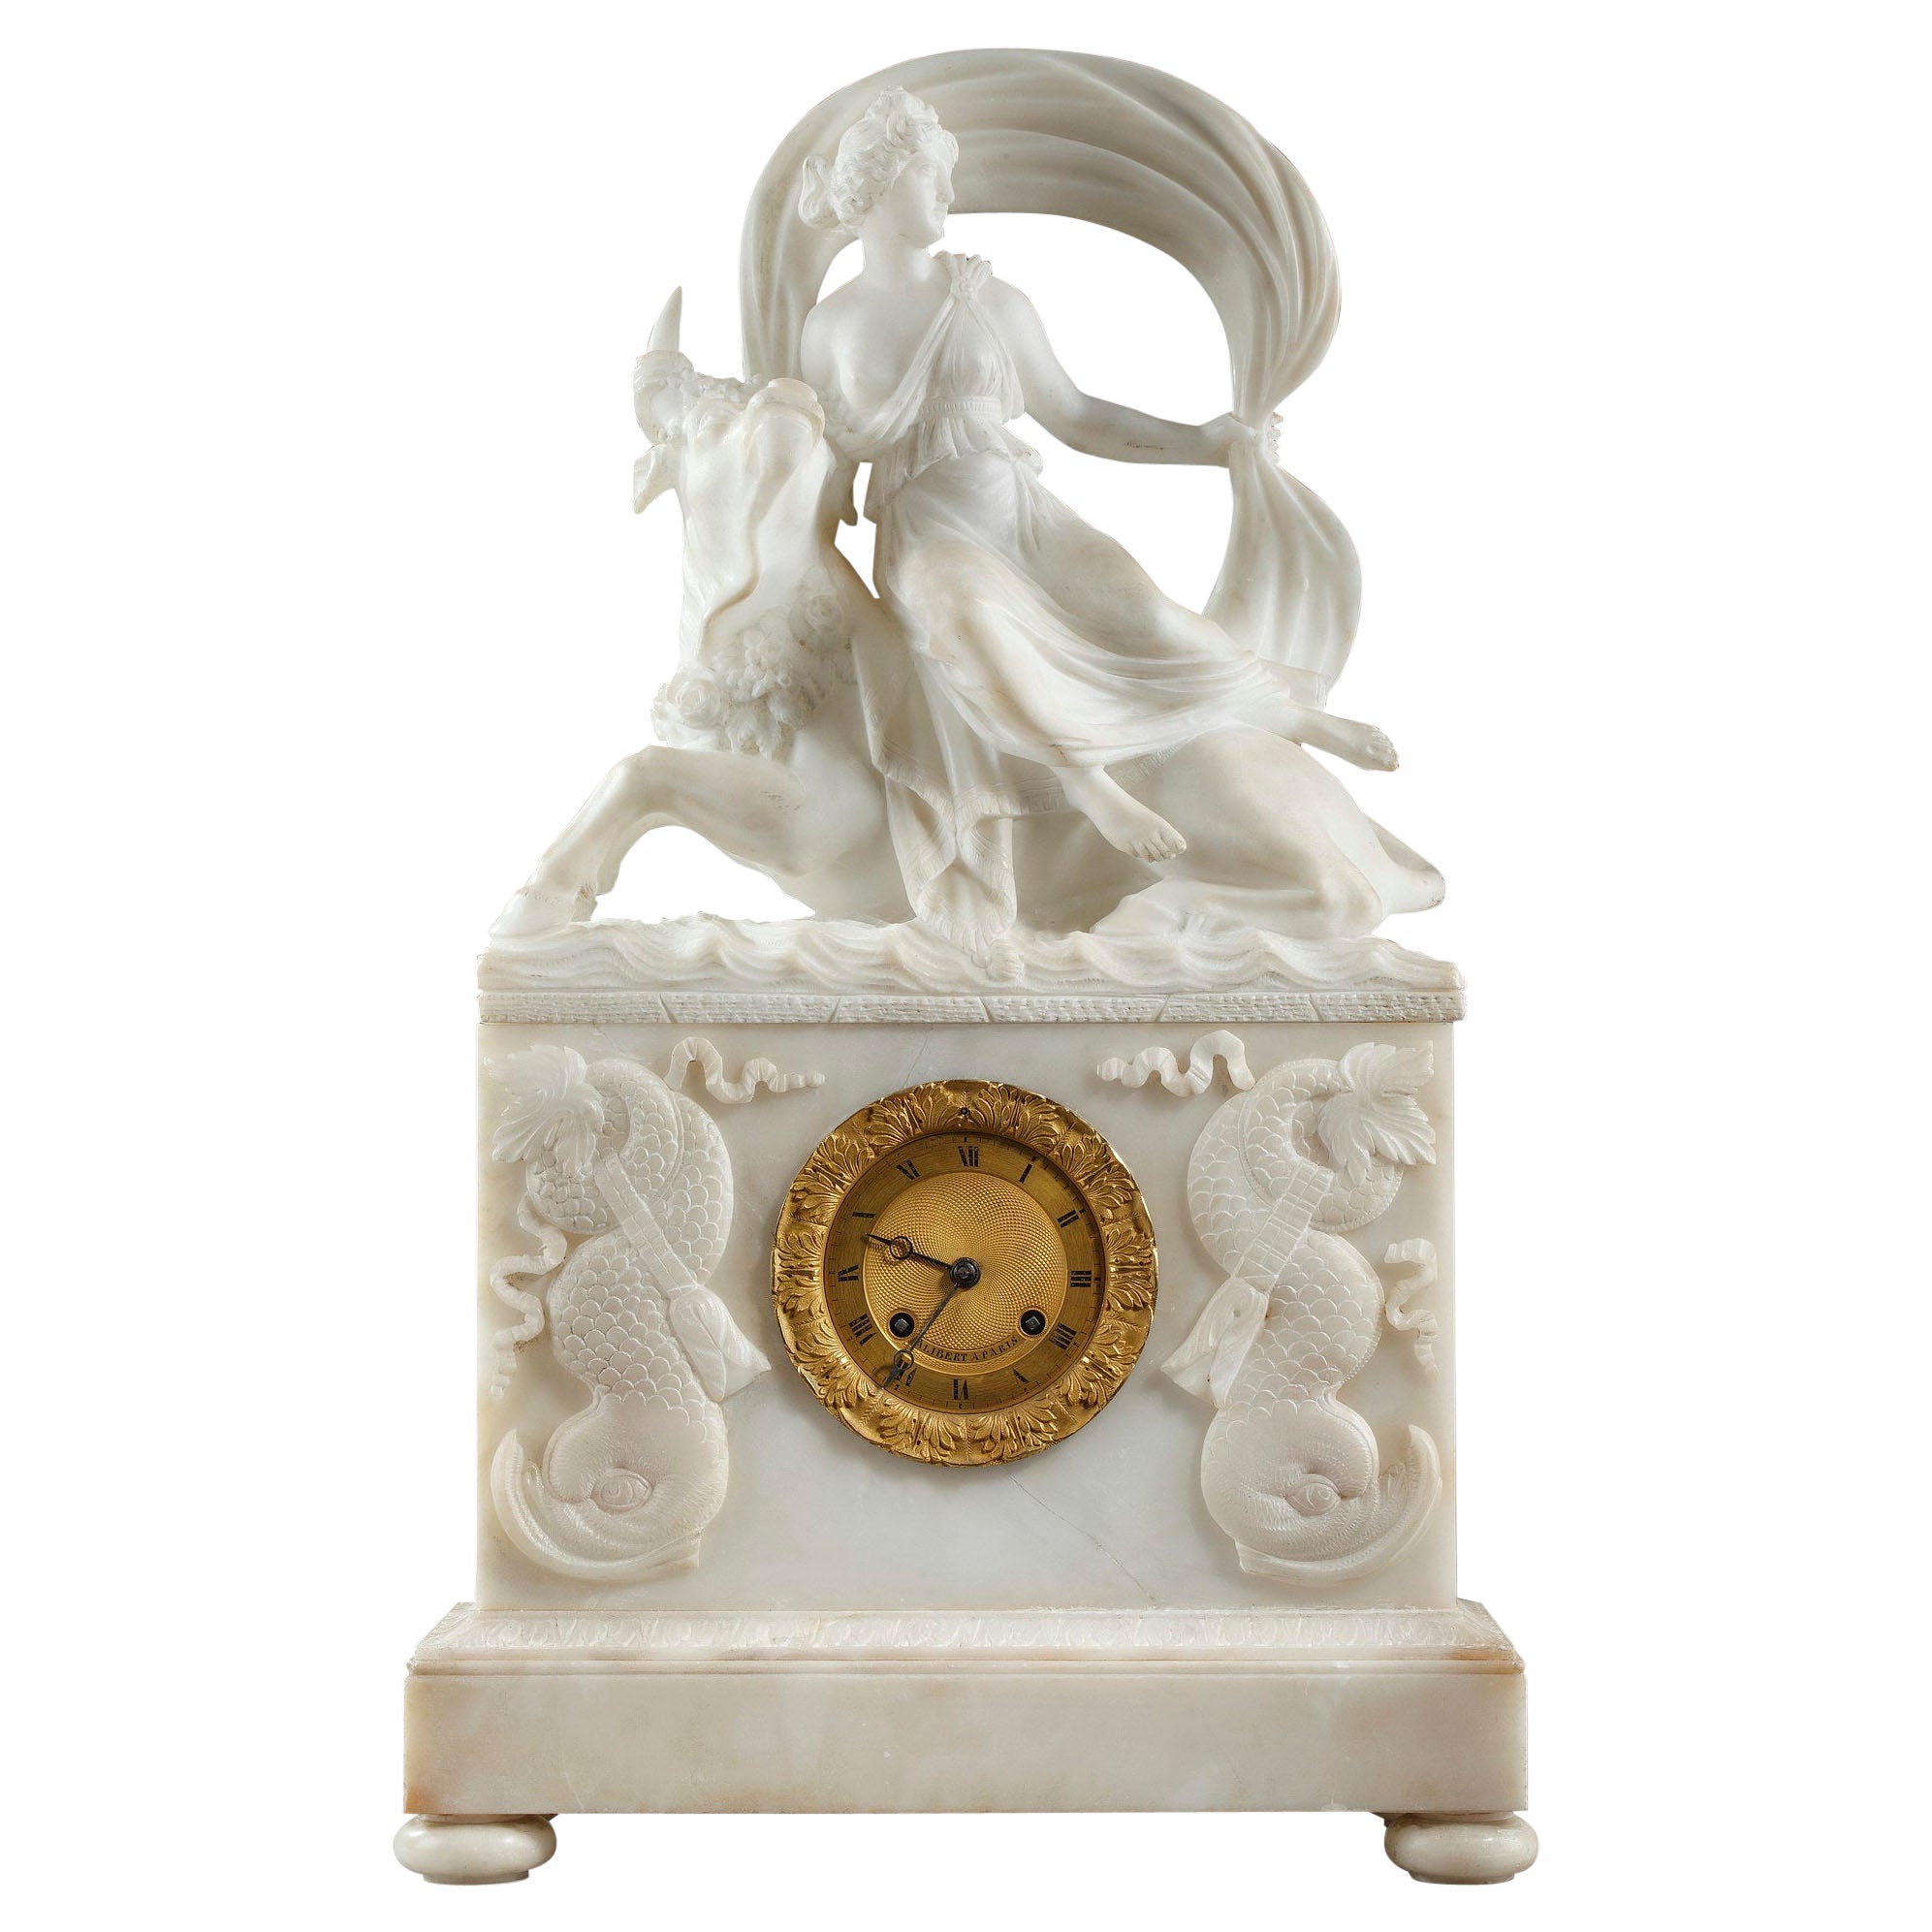 Alabaster Clock, "The abduction of Europa"